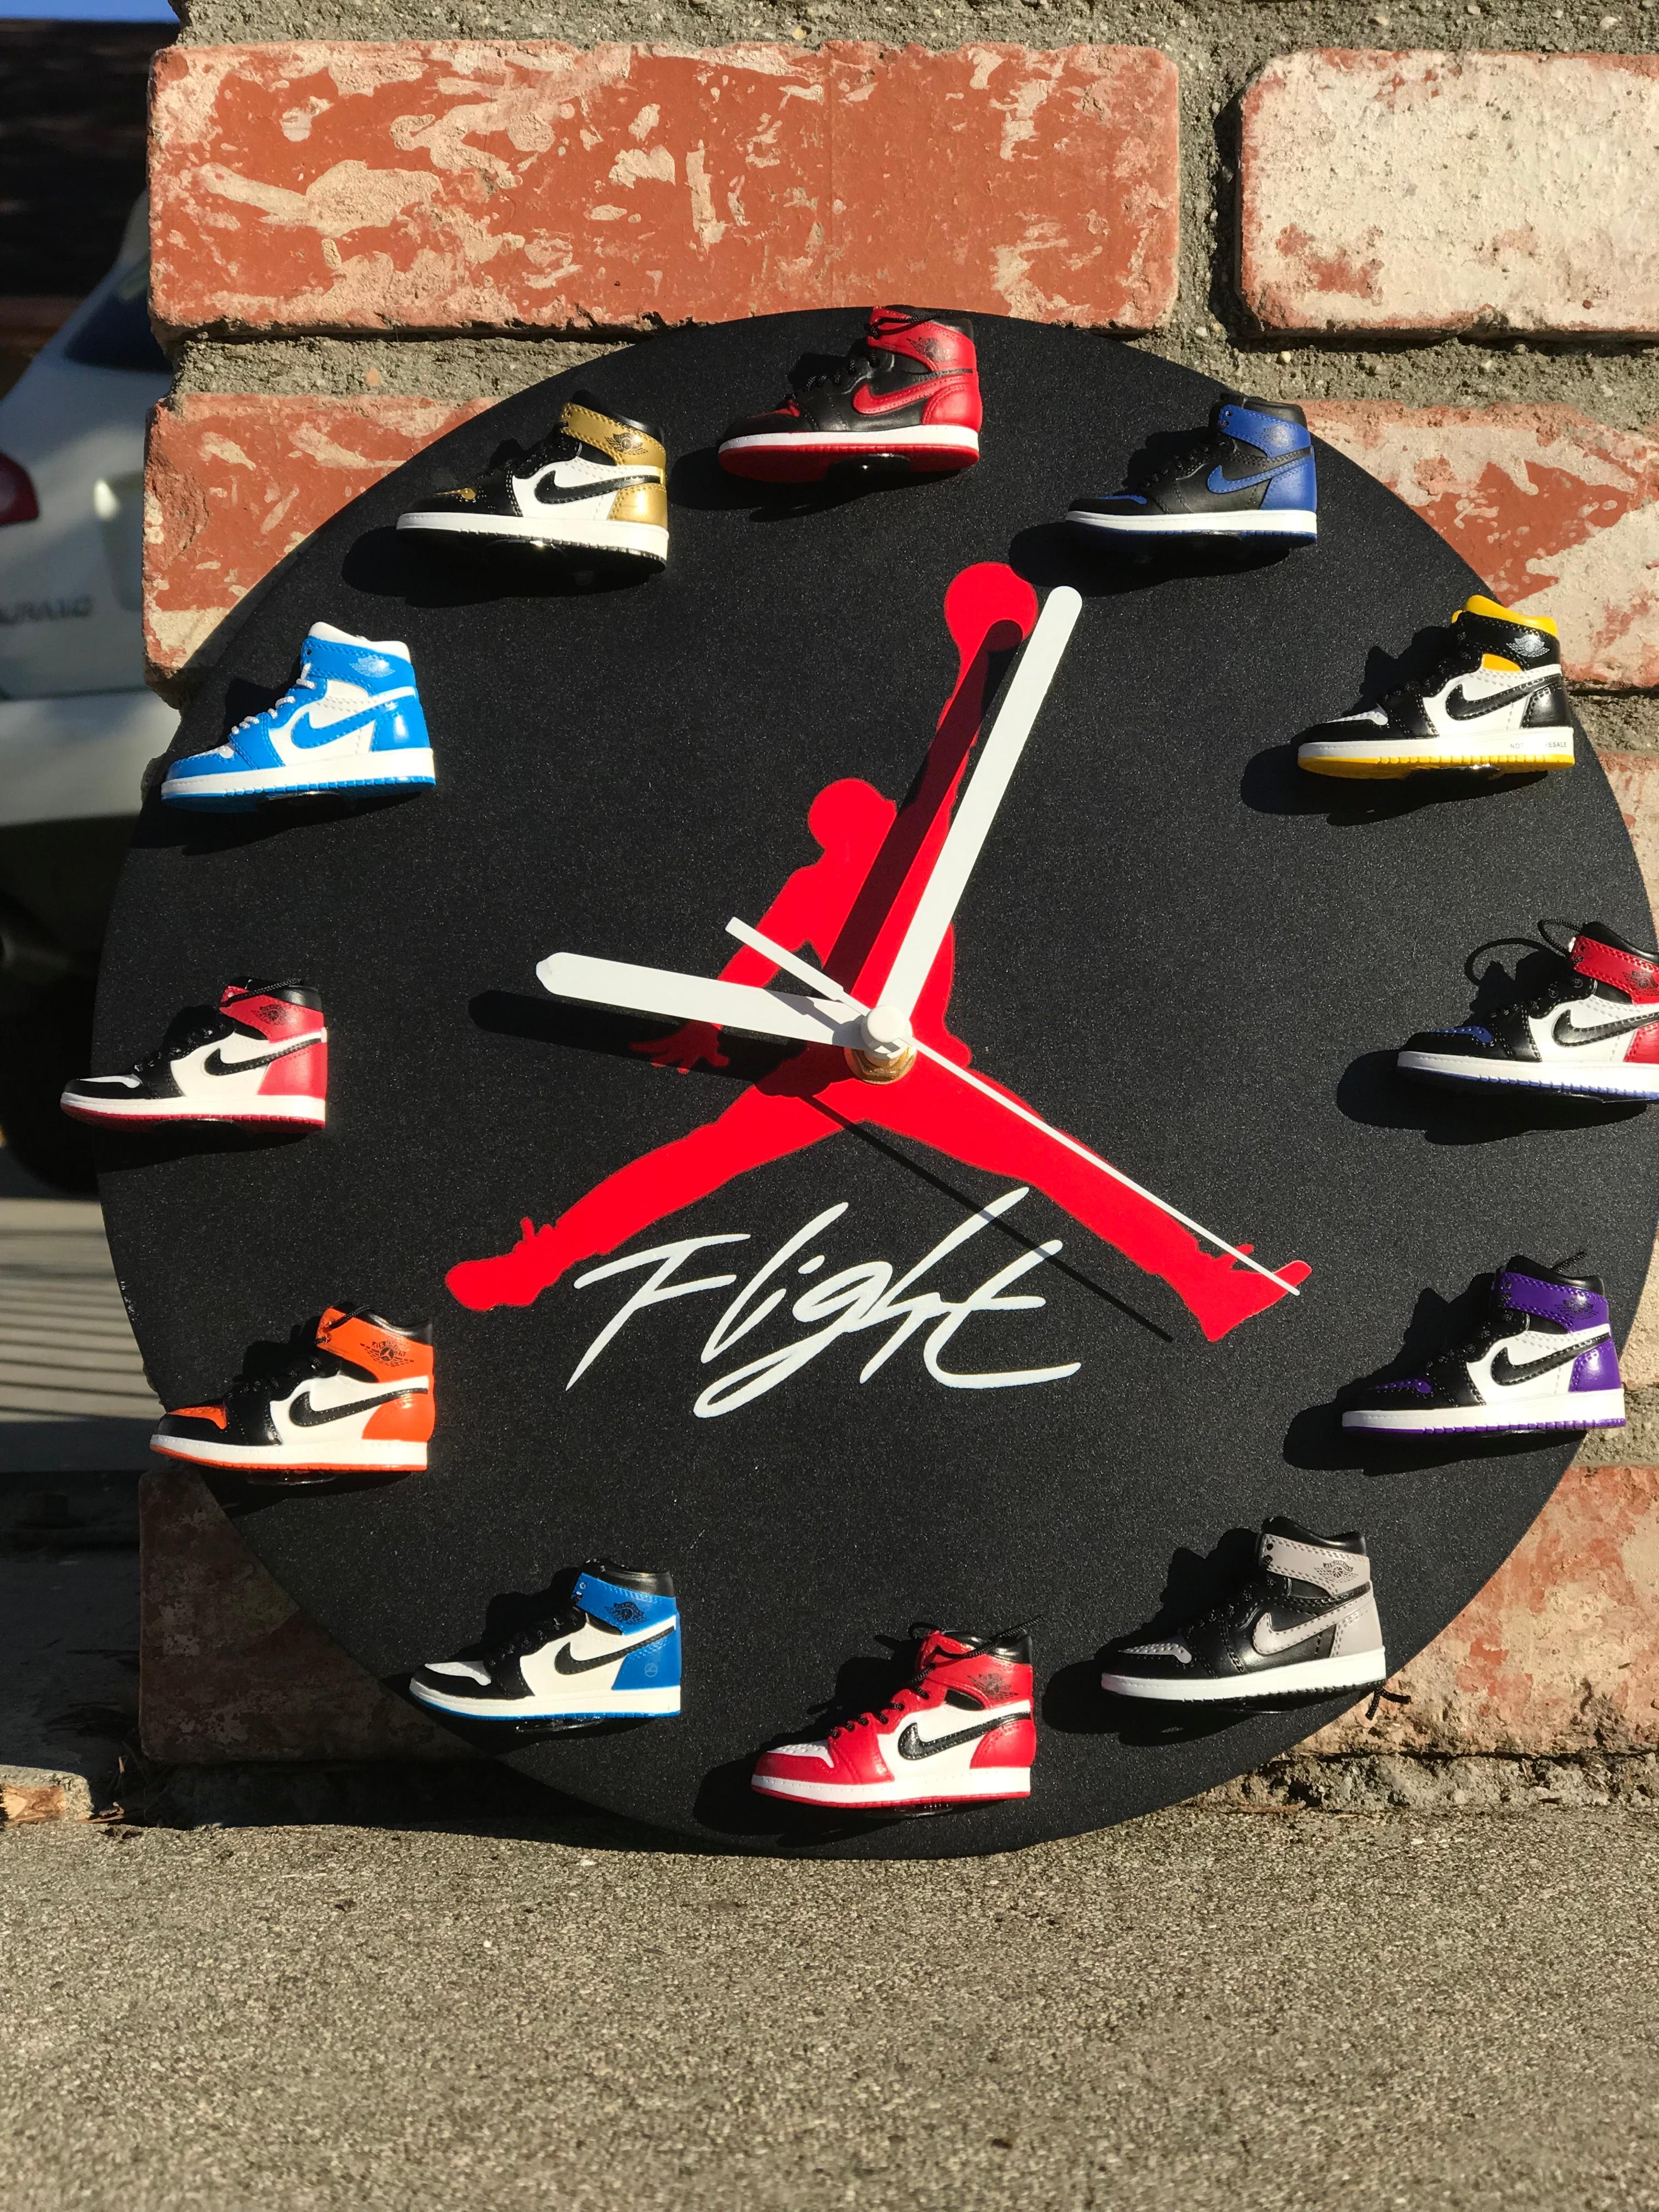 Alternate View 10 of Handcrafted 3D Sneakers Clock with 12 mini sneakers